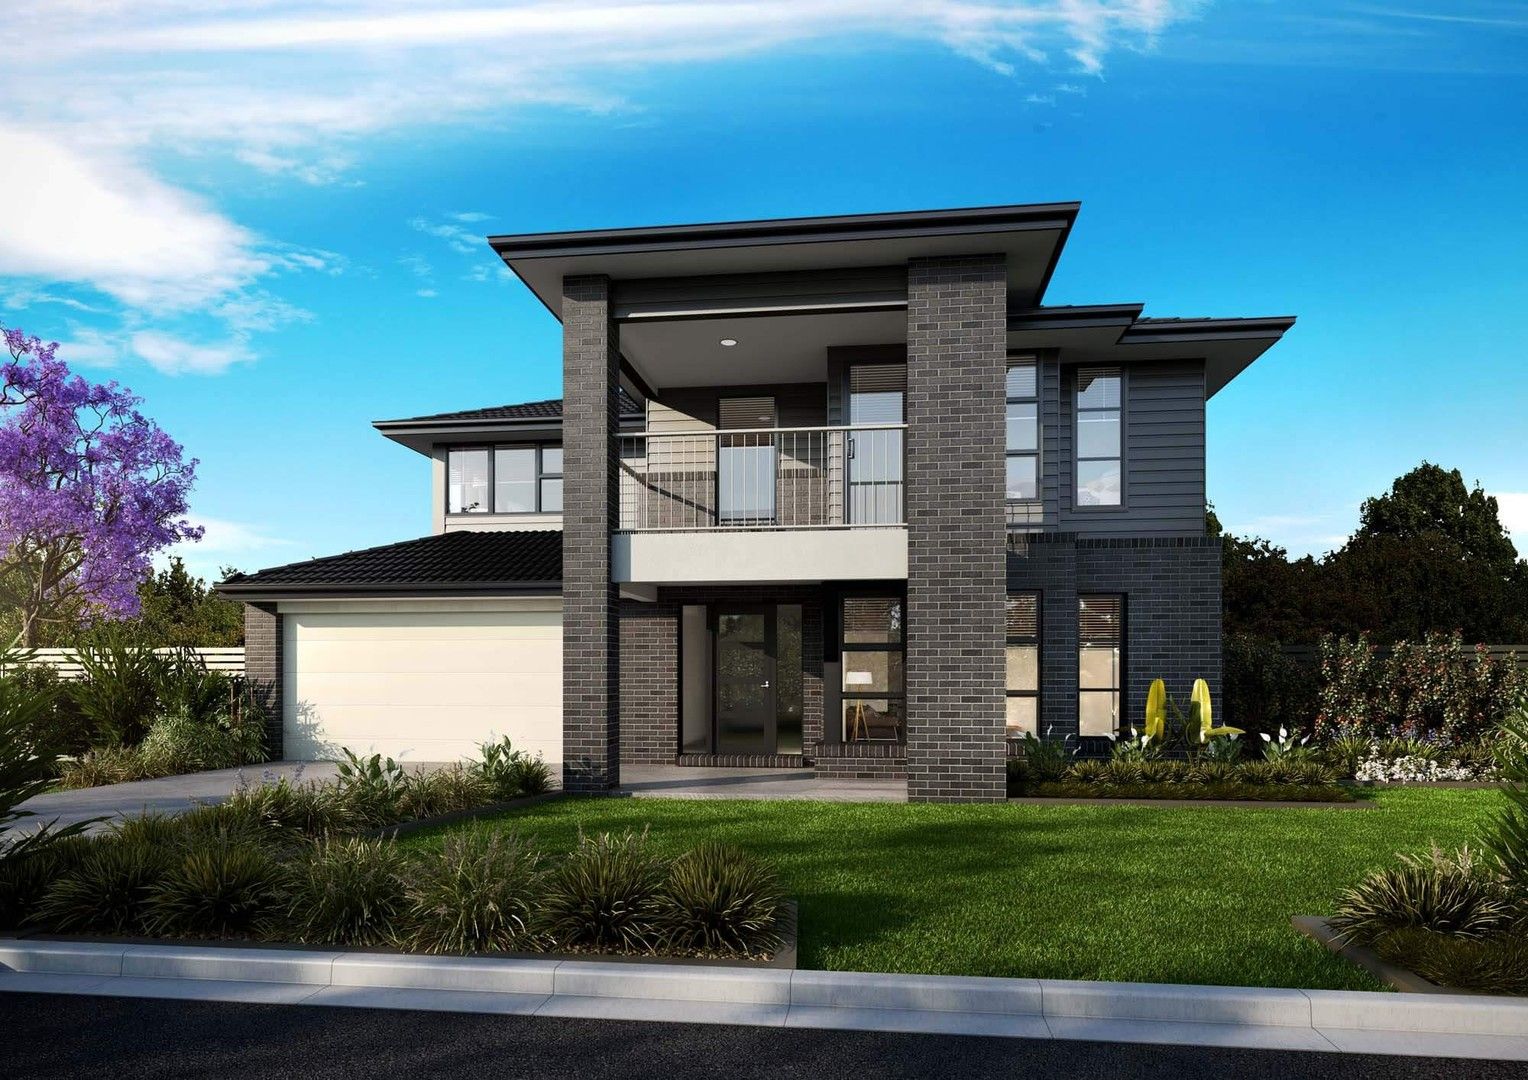 4 bedrooms New House & Land in 621 Sapphire Estate CRANBOURNE VIC, 3977